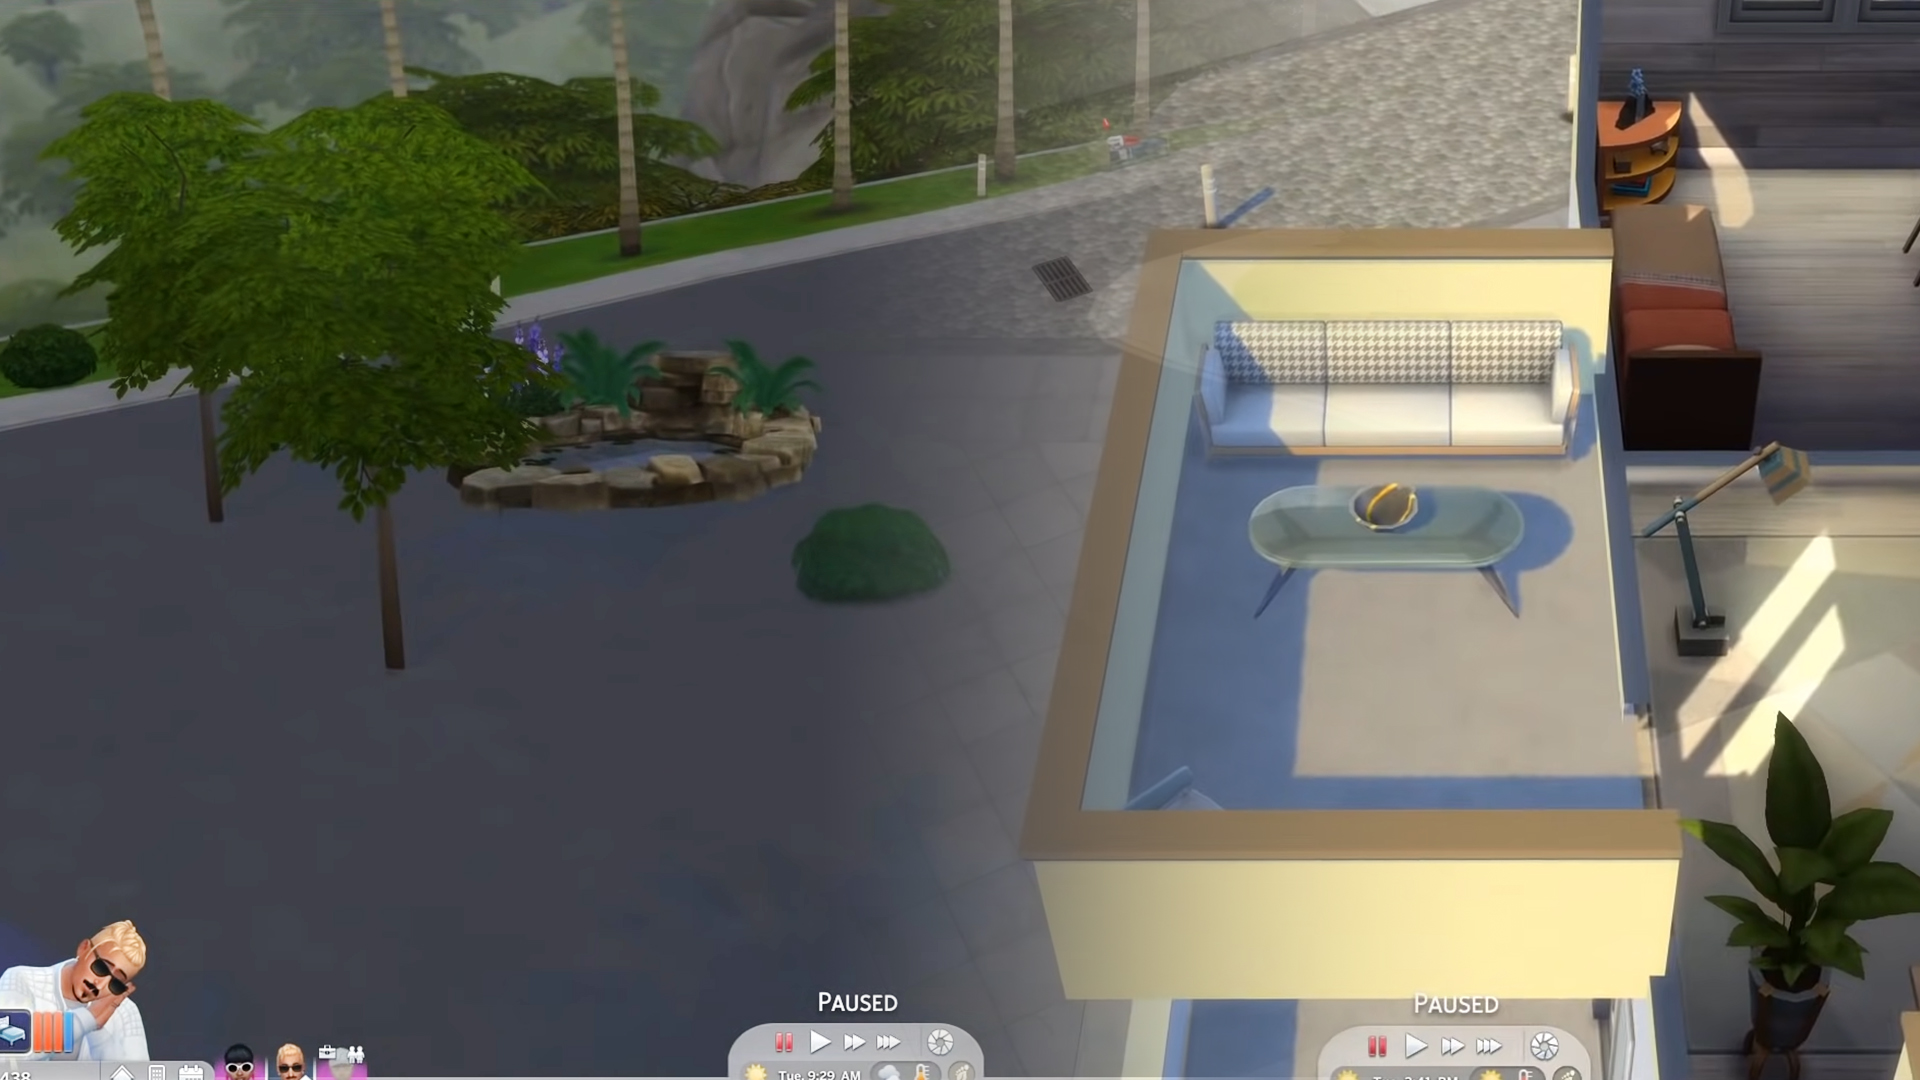 26 Sims 4 Tool Mod How To Use
10/2022